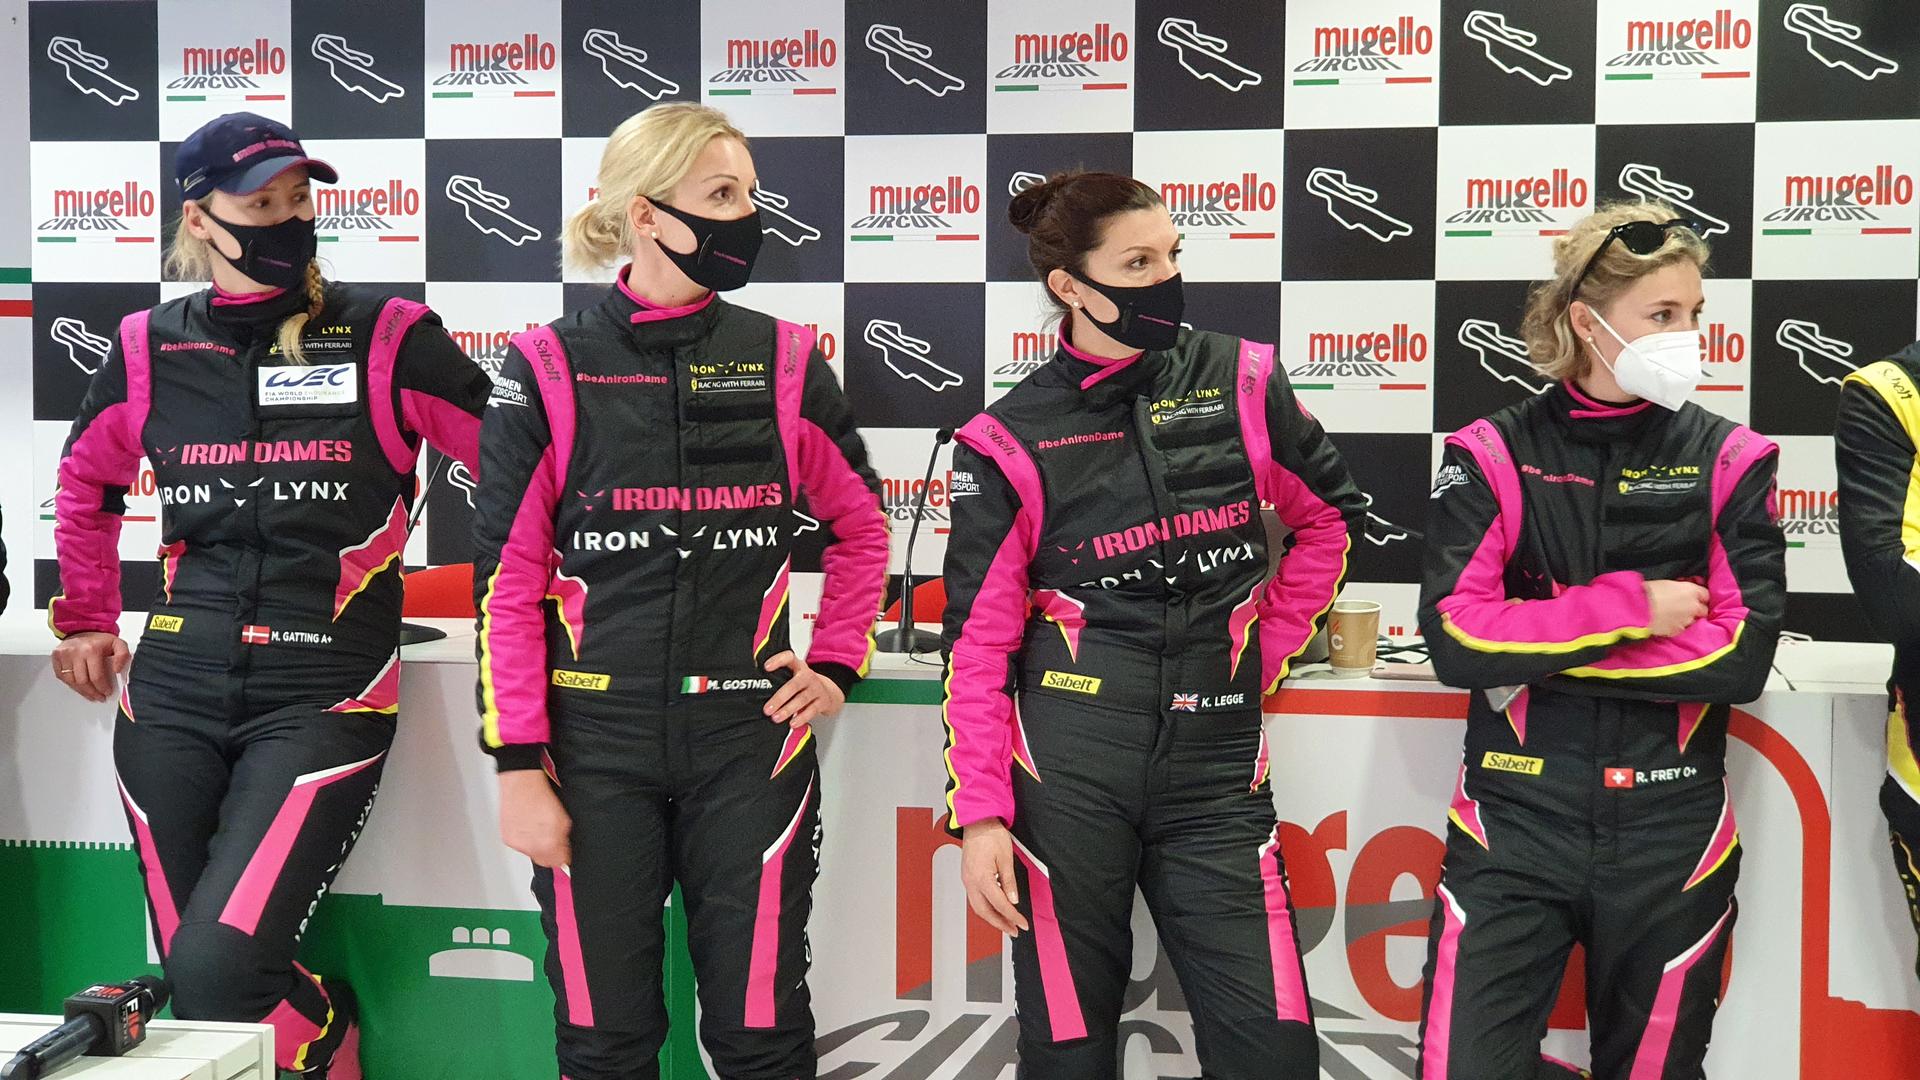 Four women wear black and pink race tracksuits.